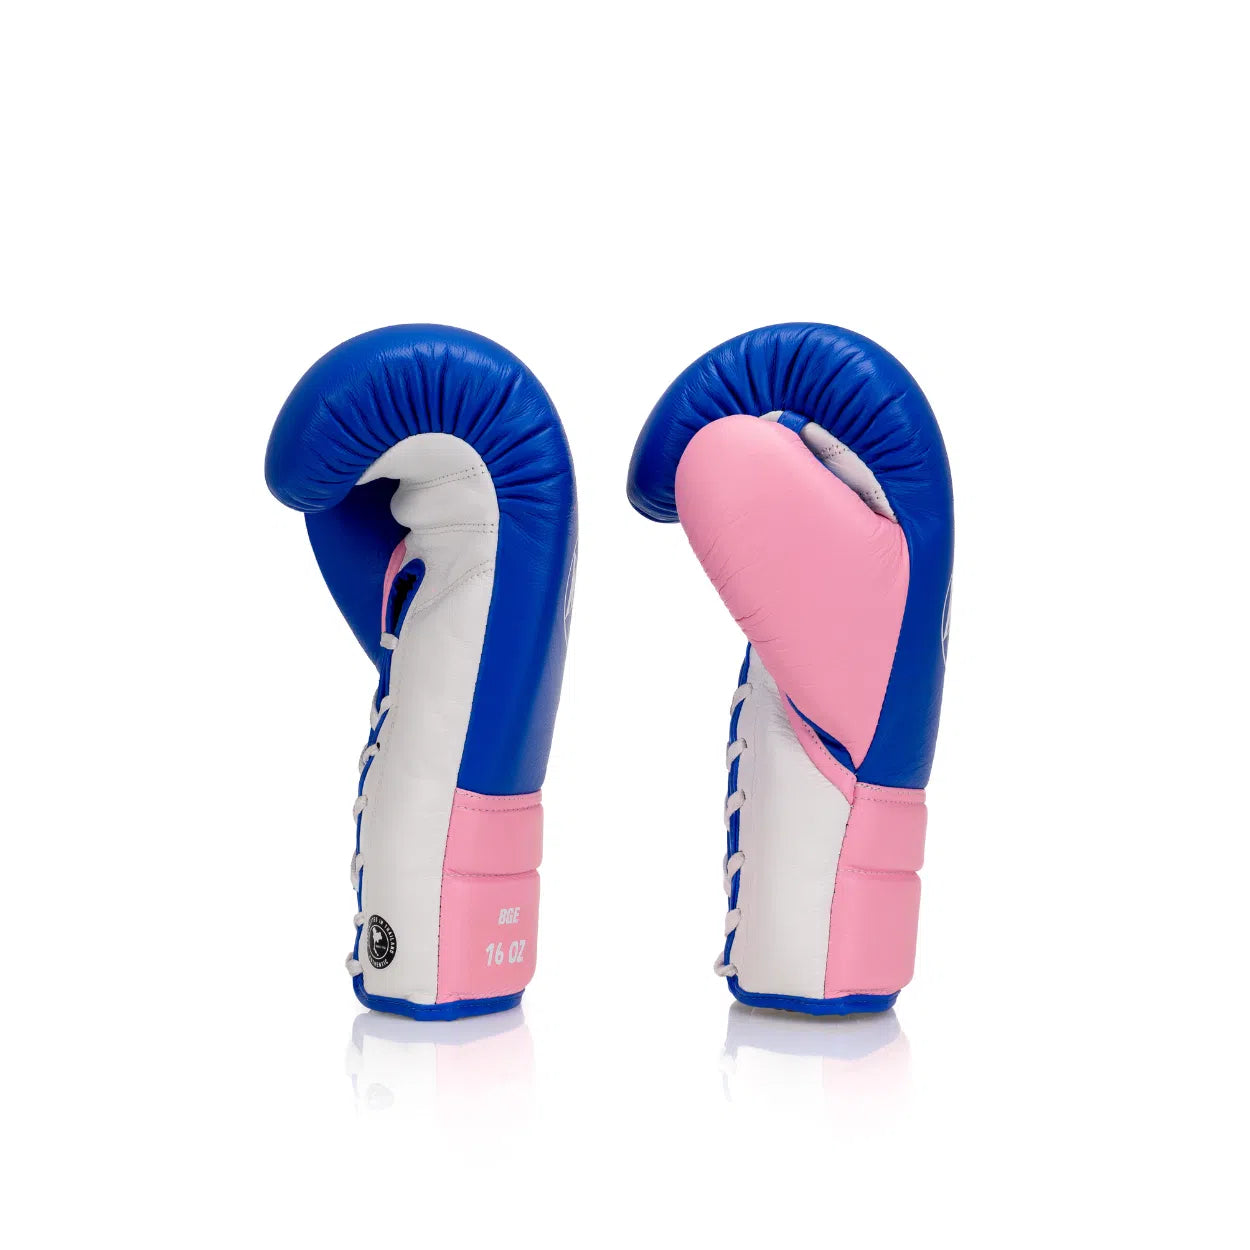 Elite Series Lace-up Boxing Glove - Blue/Pink/White